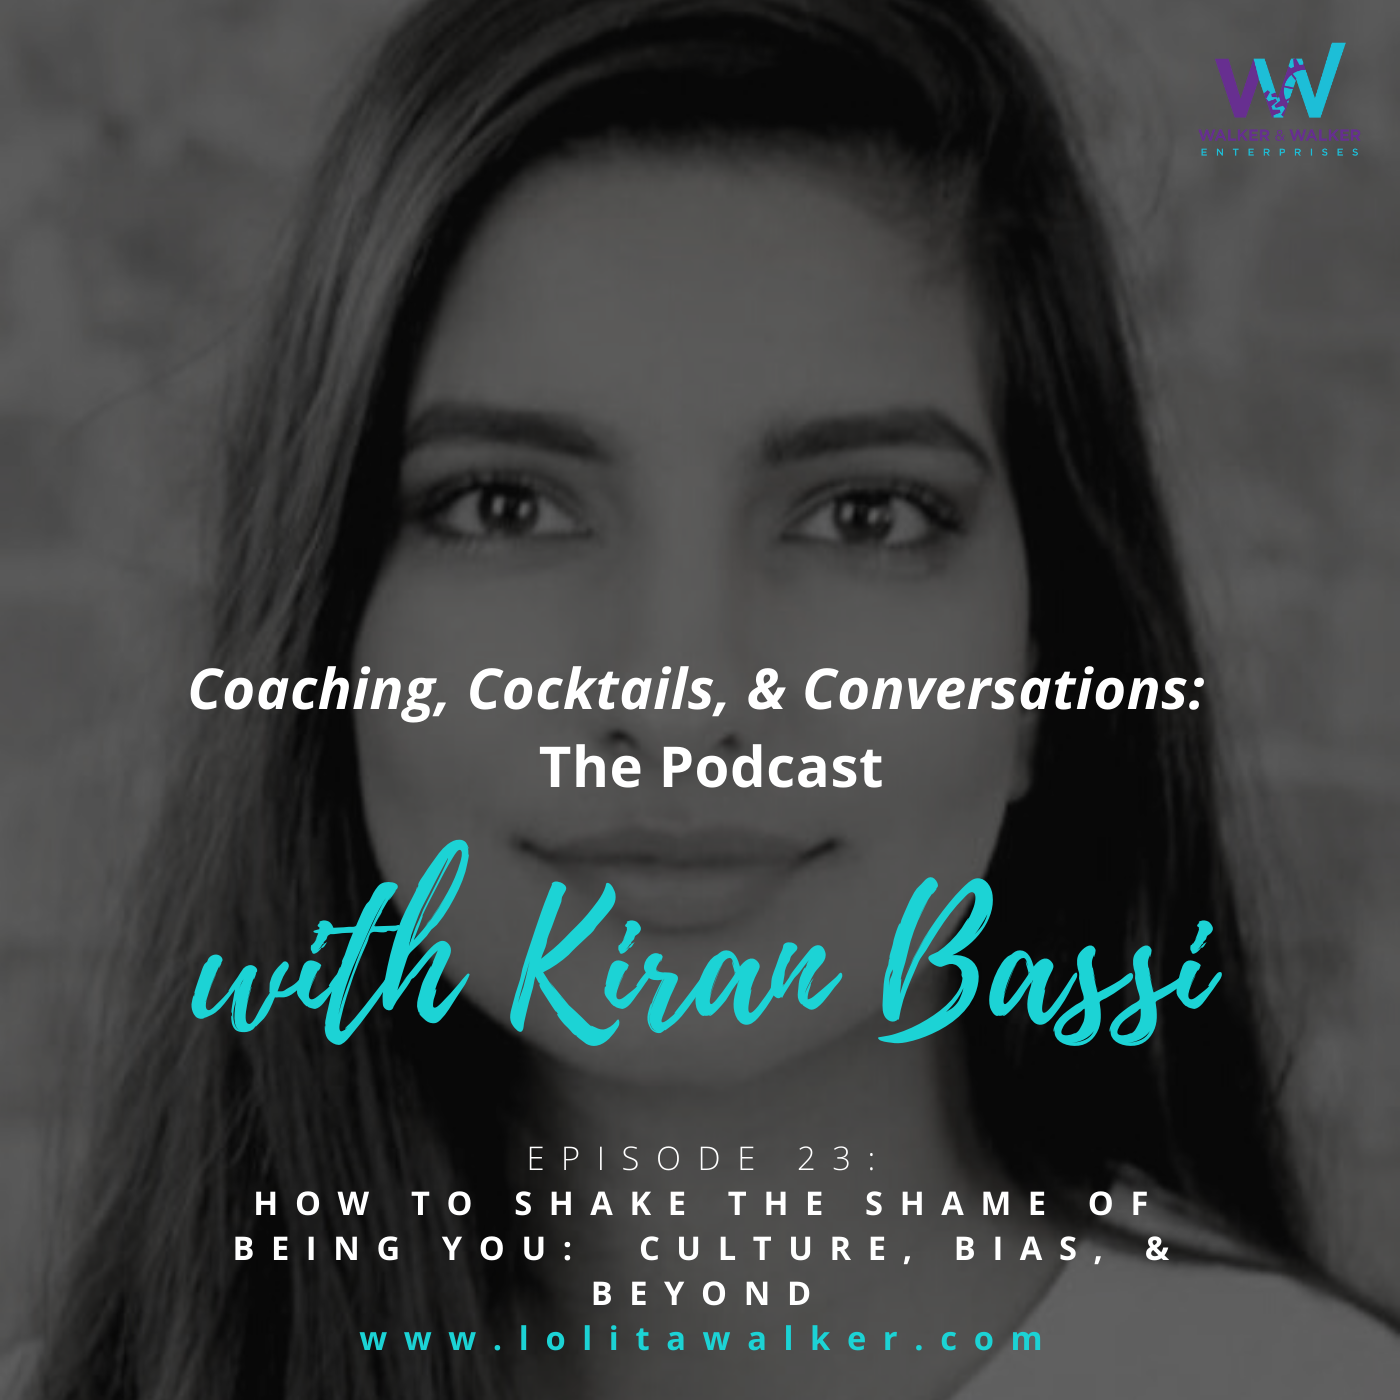 S2E23 - How To Shake The Shame of Being You:  Culture, Bias & Beyond (with Kiran Bassi)